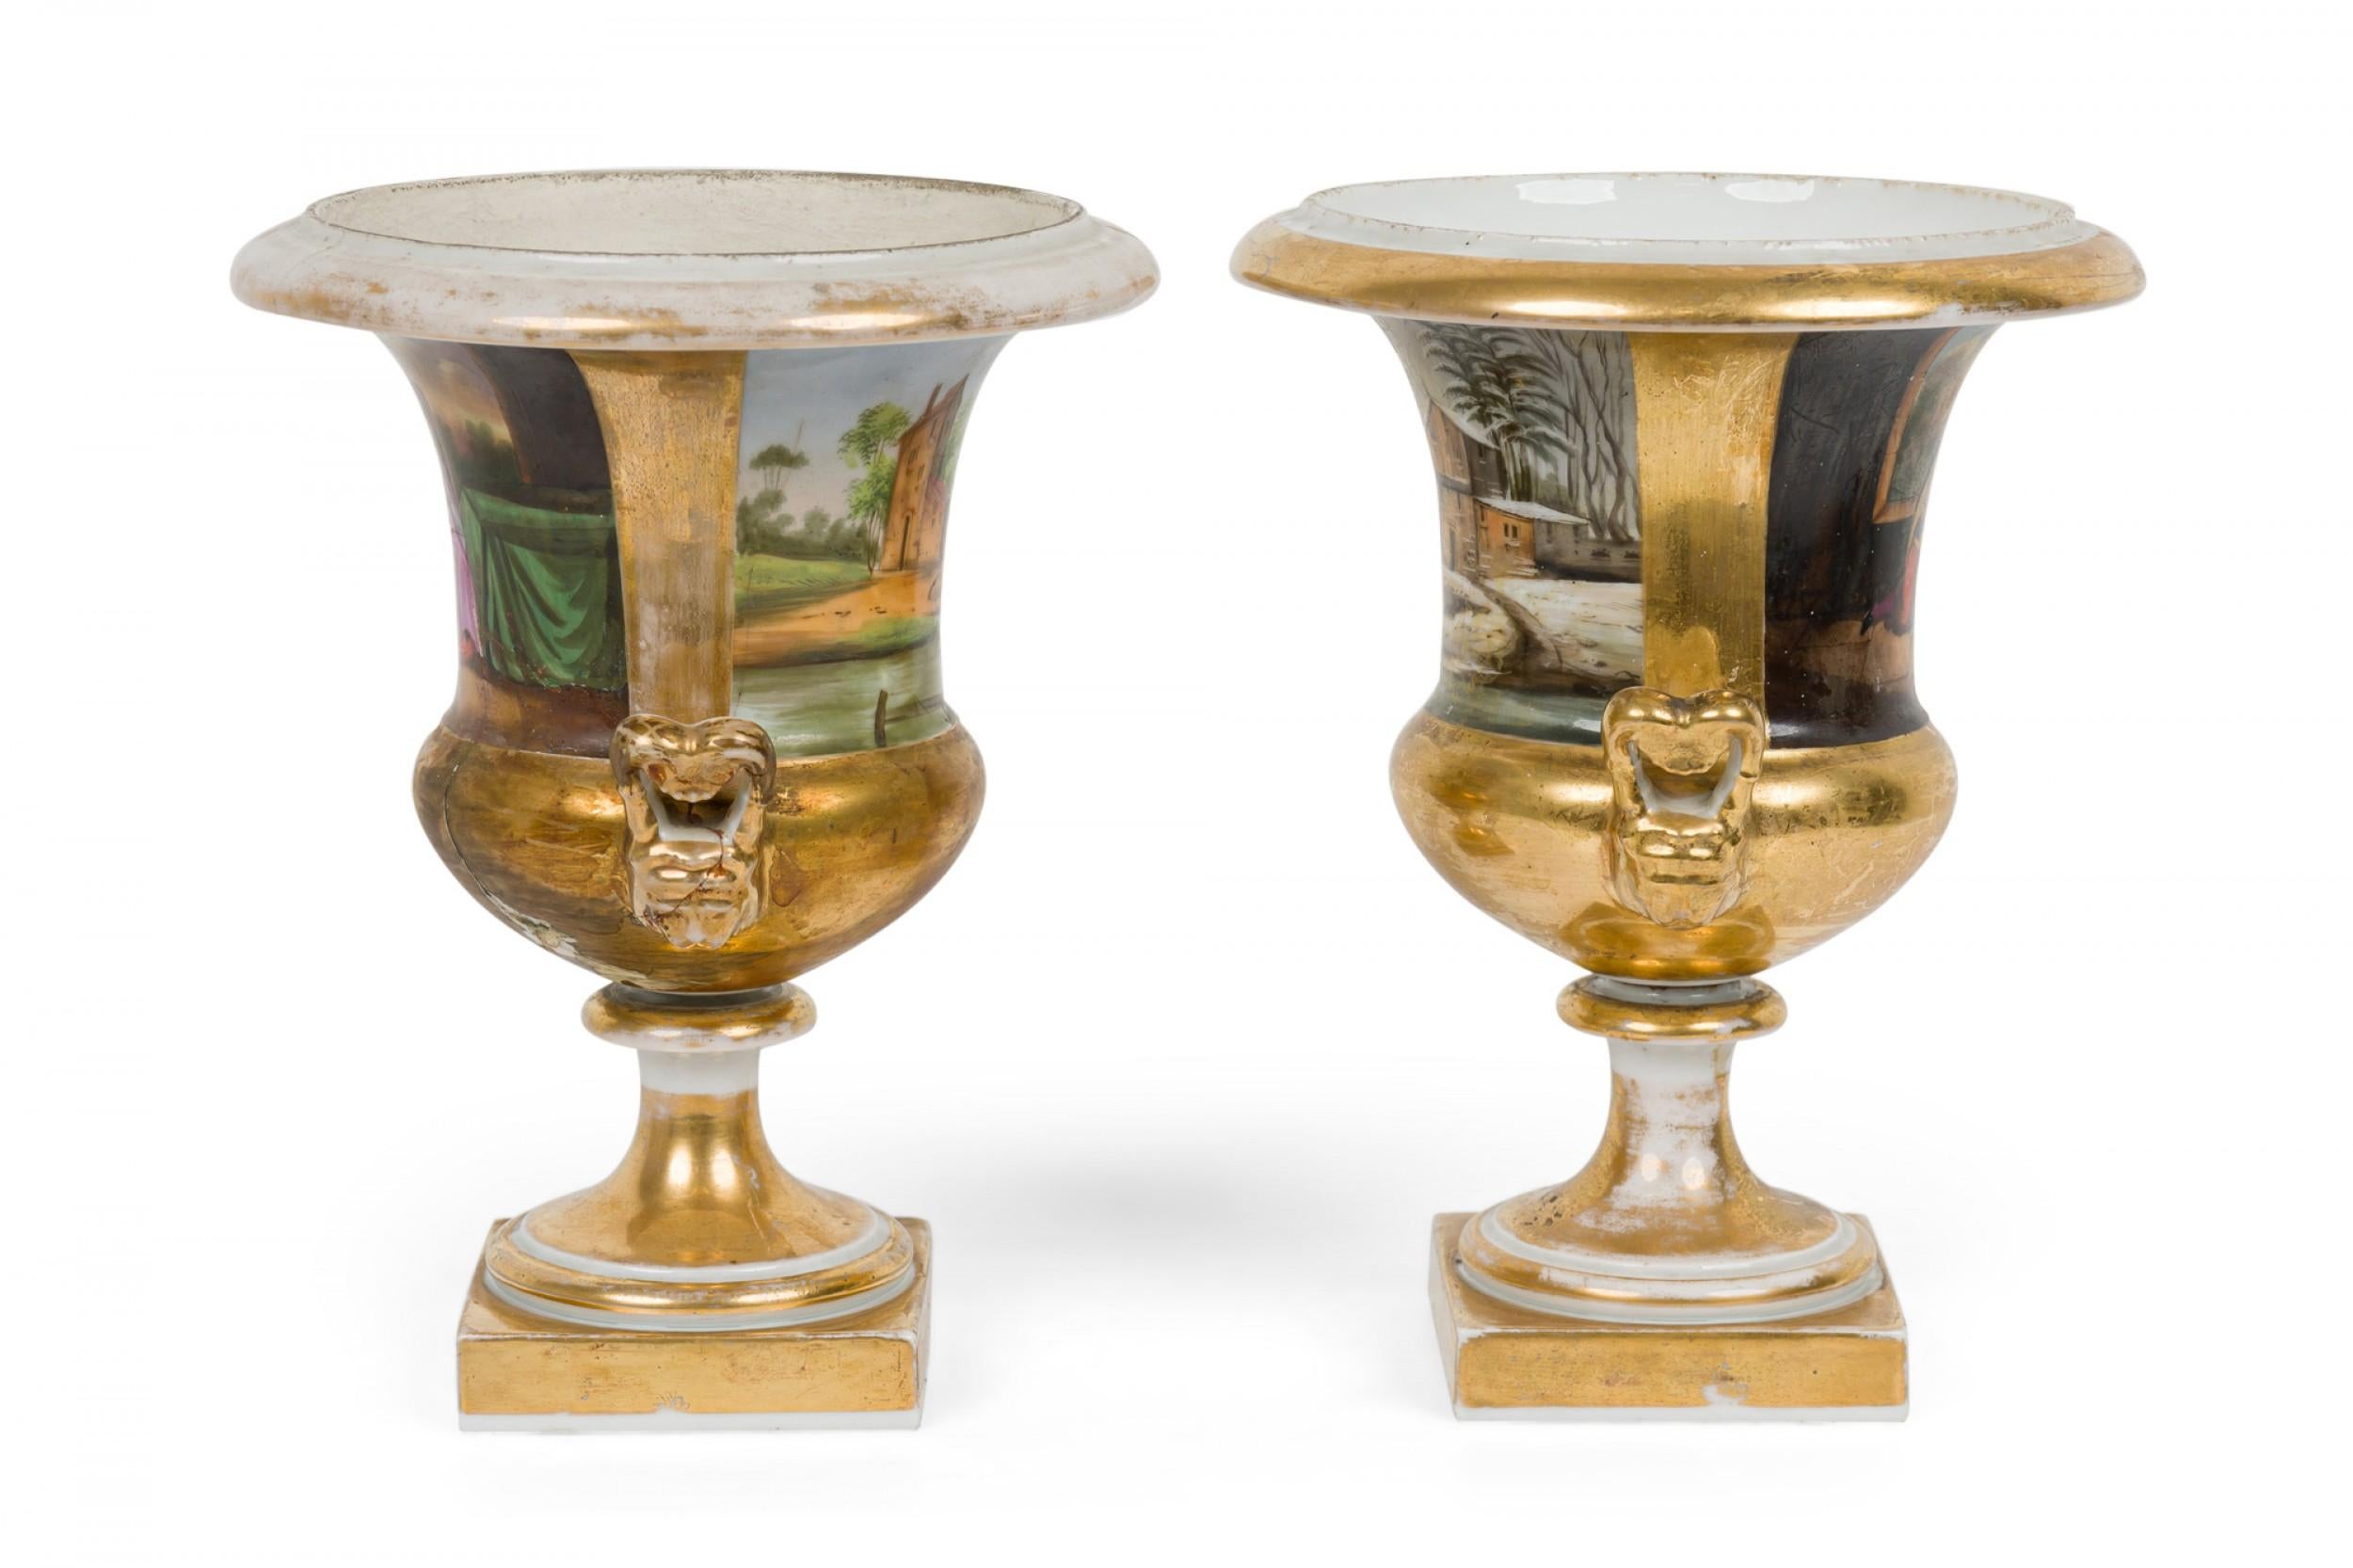 Pair of French Victorian Sevre Compagna Gilt and Painted Porcelain Urns For Sale 1